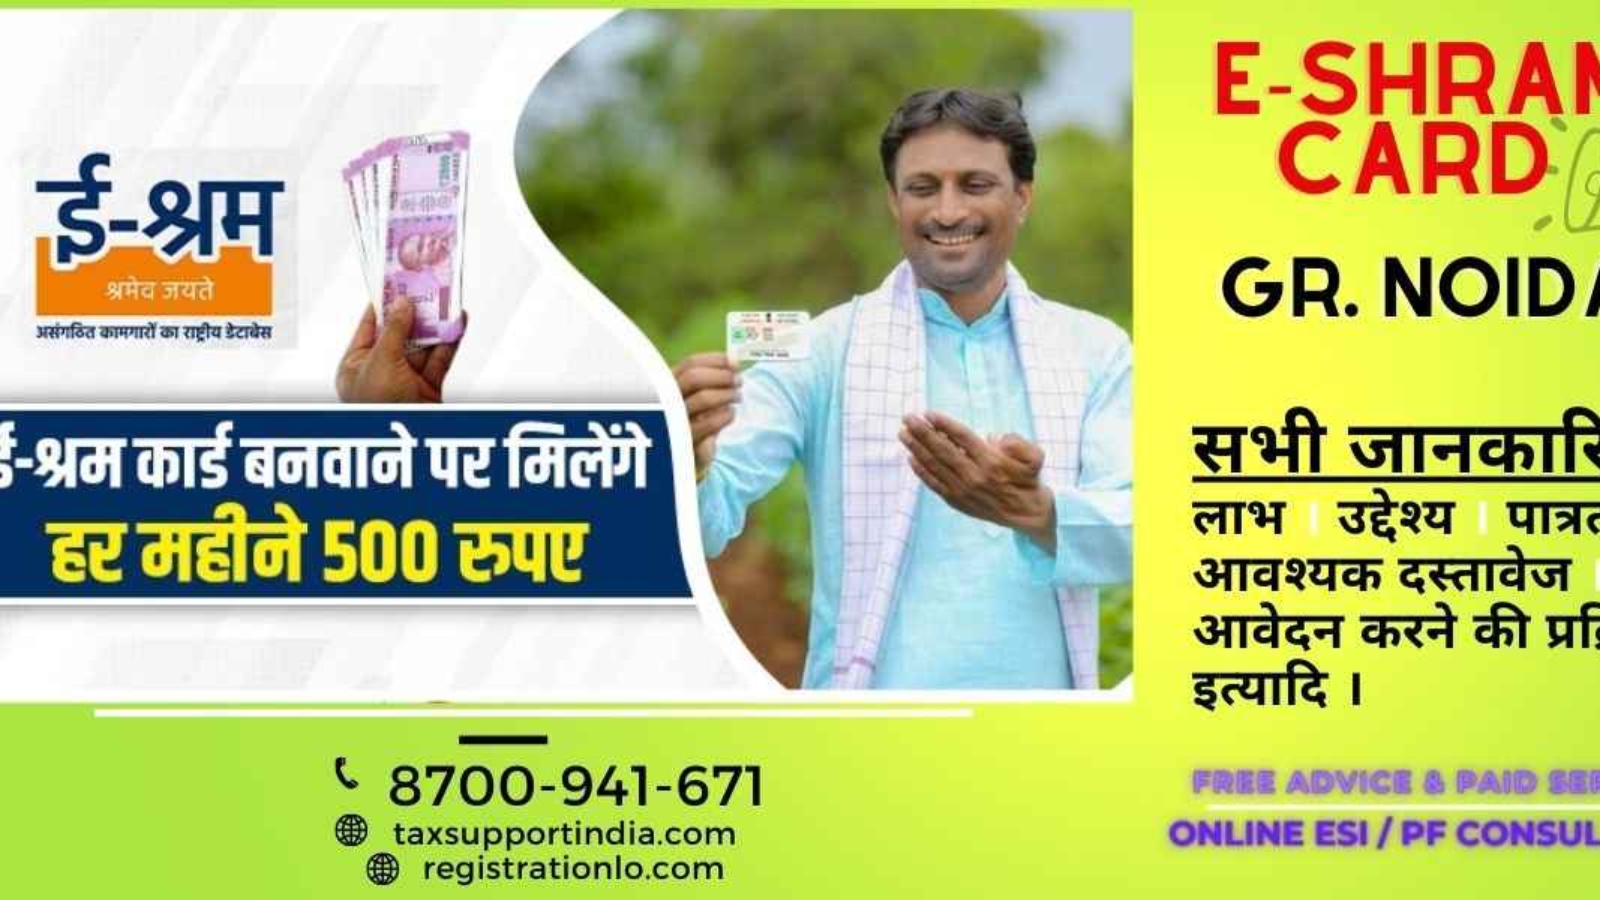 E Shram Card Greater Noida For Unorganised Workers Profit Online Registrations Benefits Required Documents